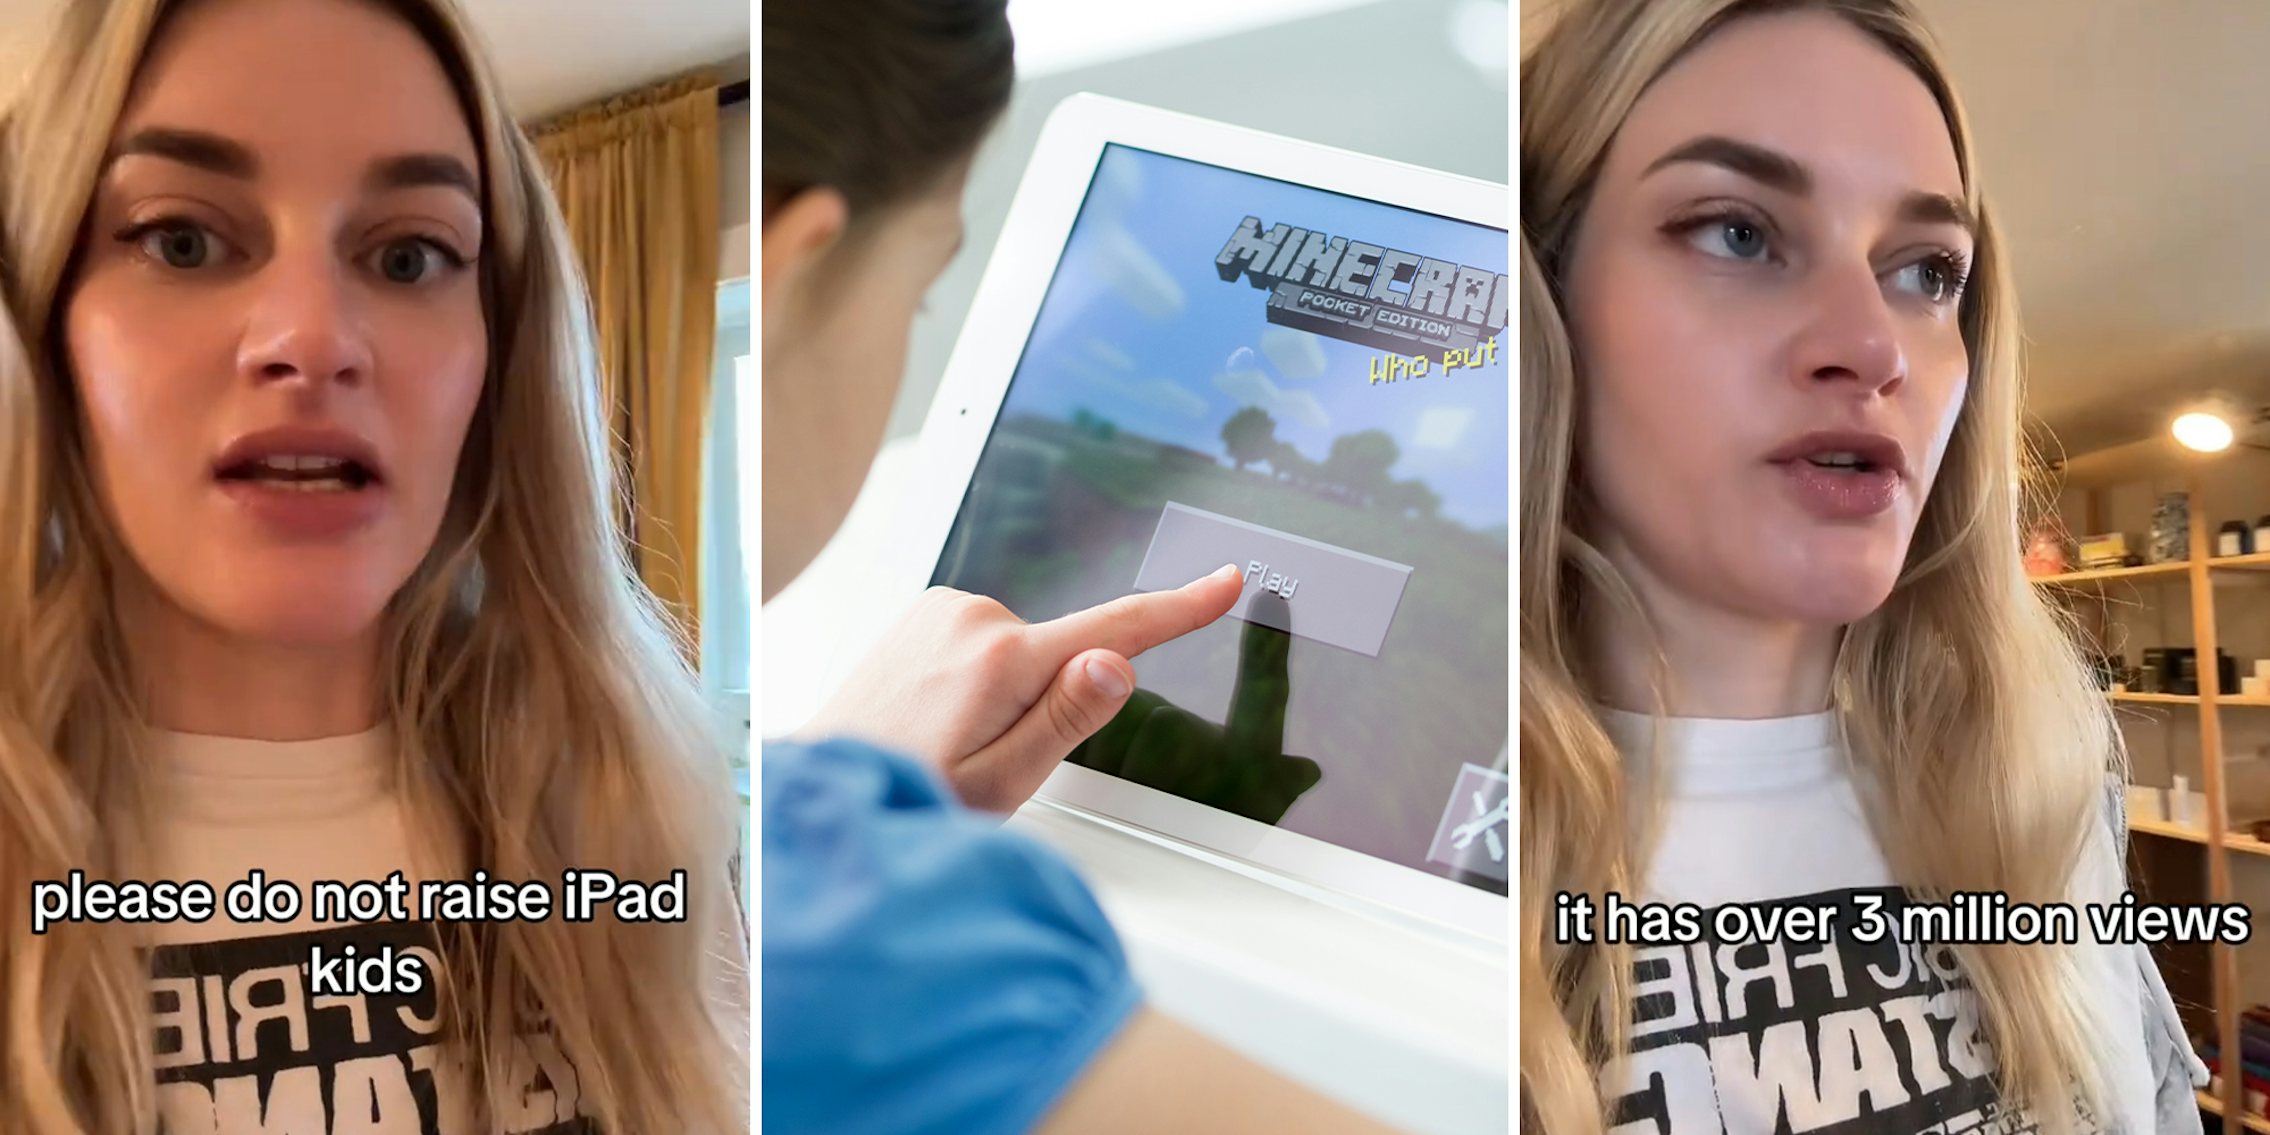 Mom warns not to raise iPad kids. Here's what she's seeing in her 12-year-old after she let her always be on it